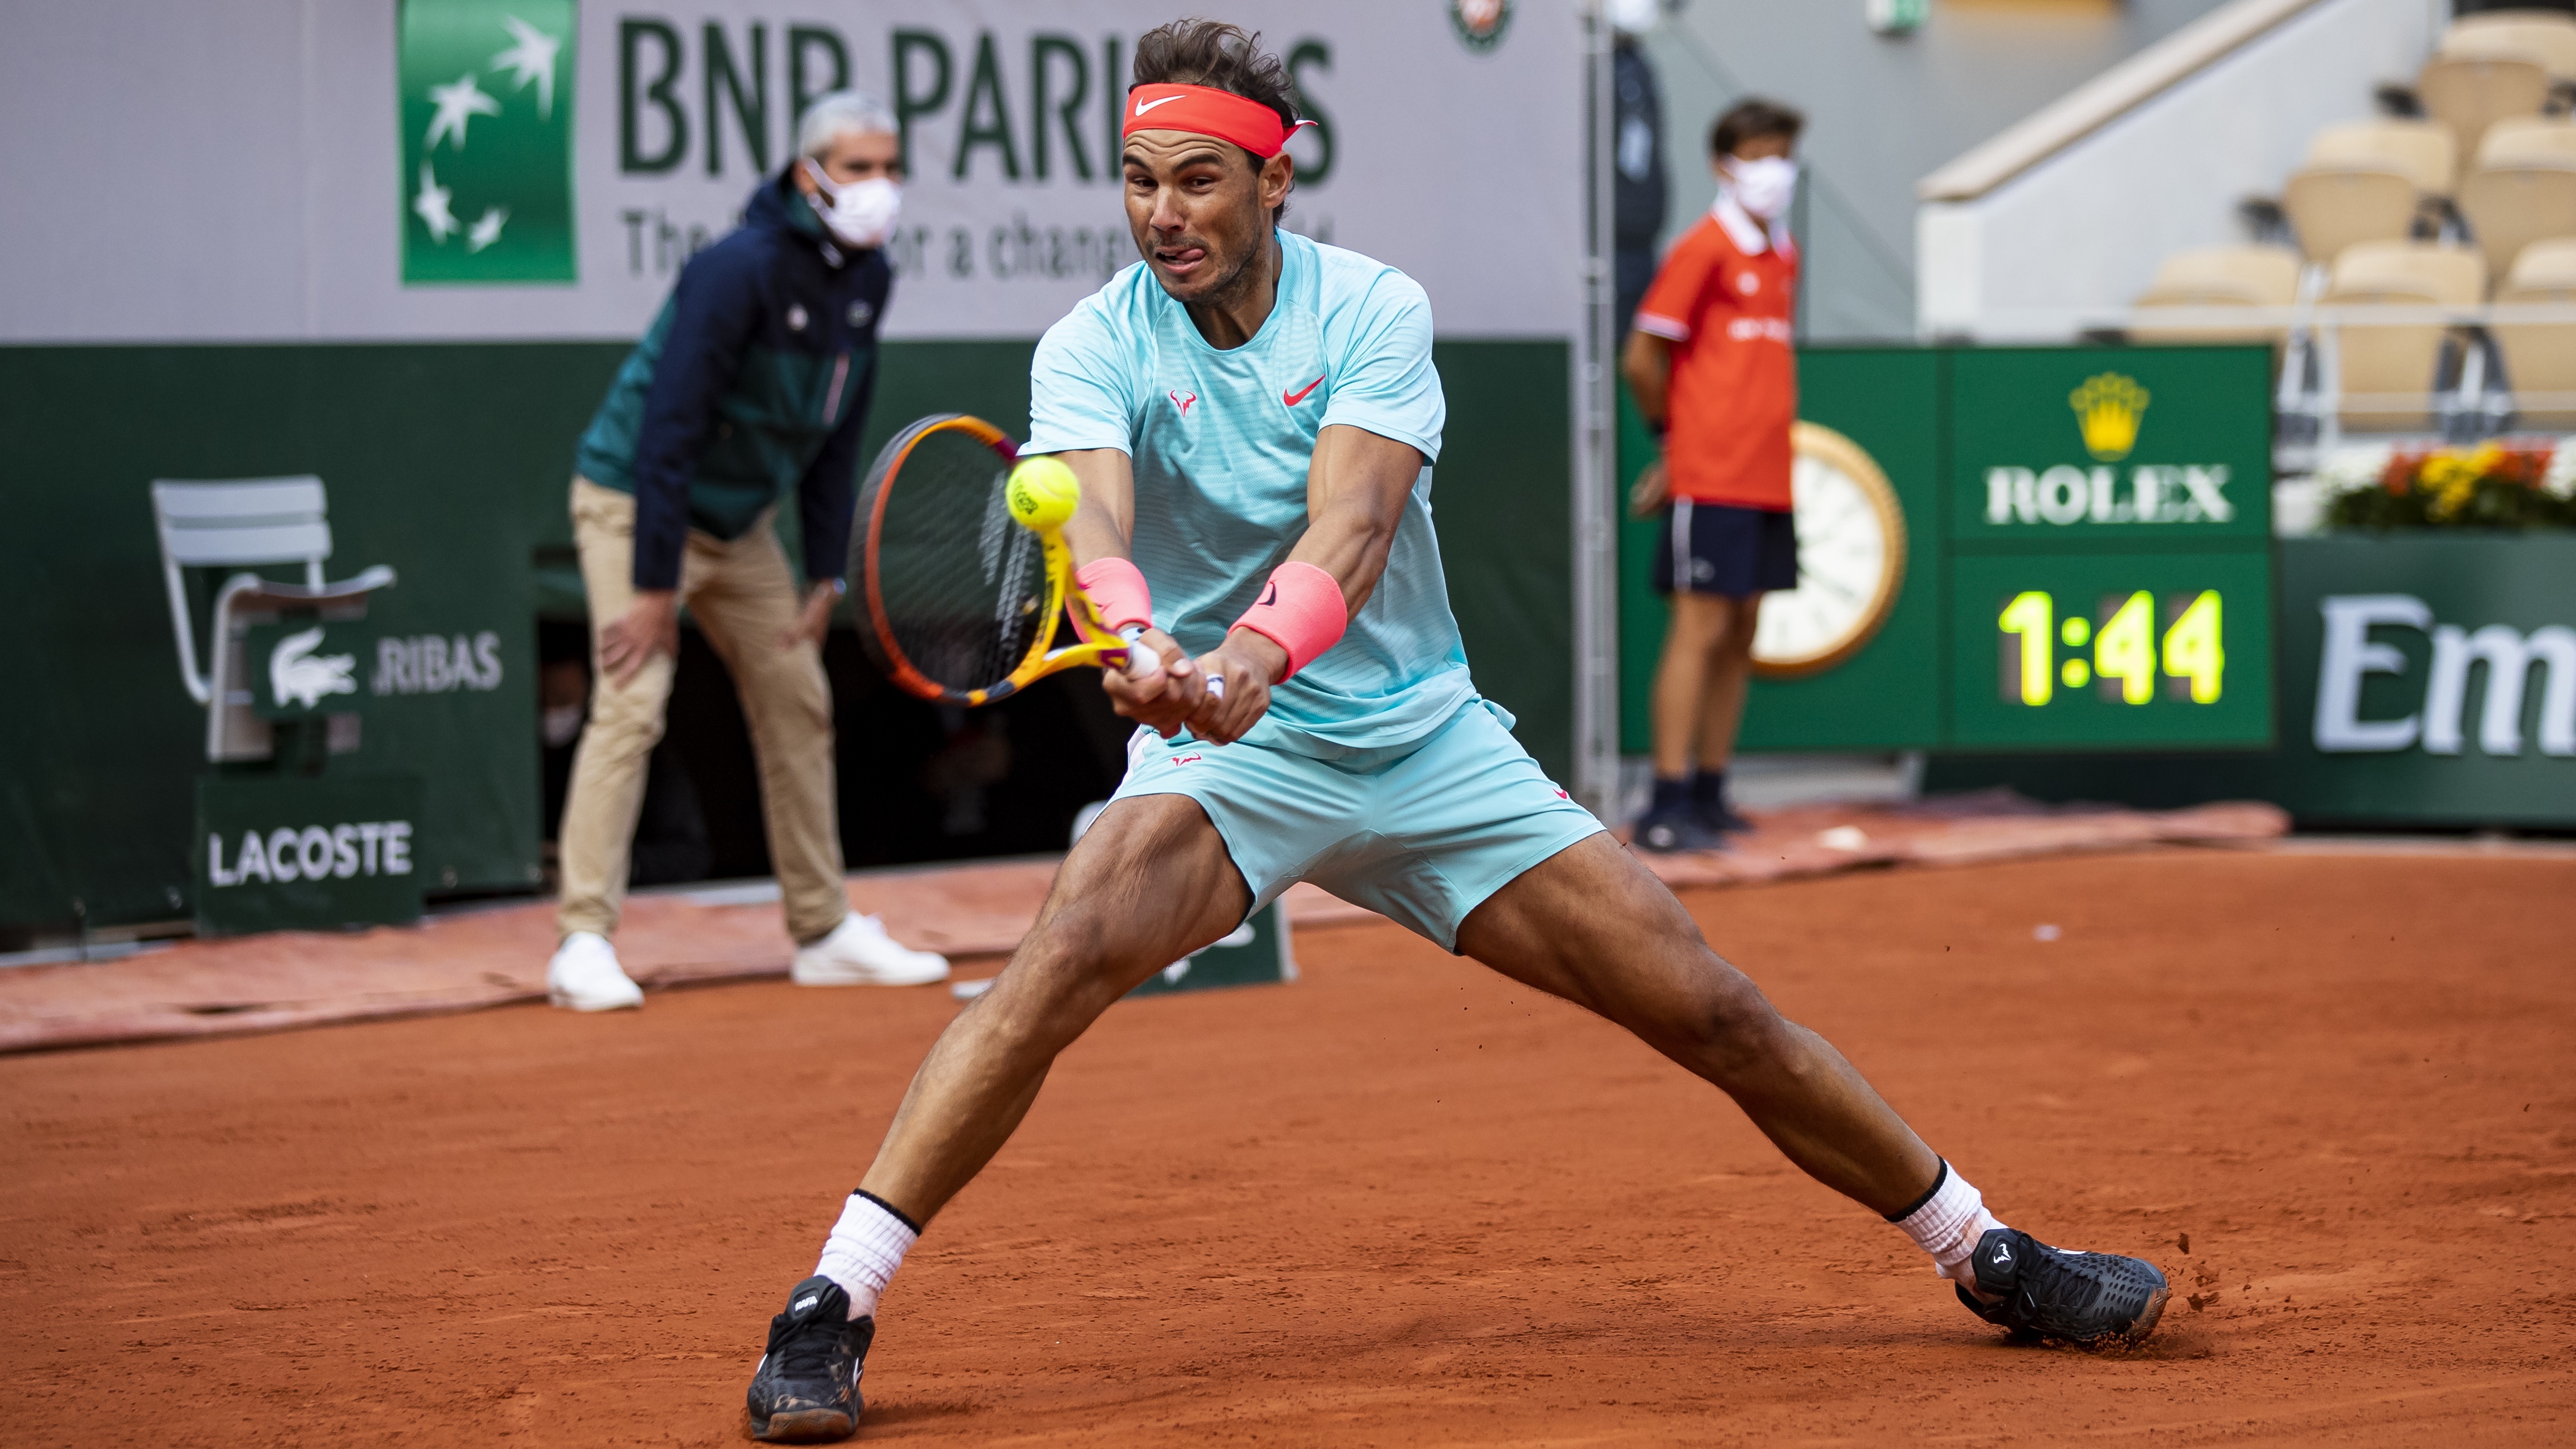 handleiding cijfer Raffinaderij 2022 French Open live stream: How to watch the Roland-Garros action online  | Tom's Guide